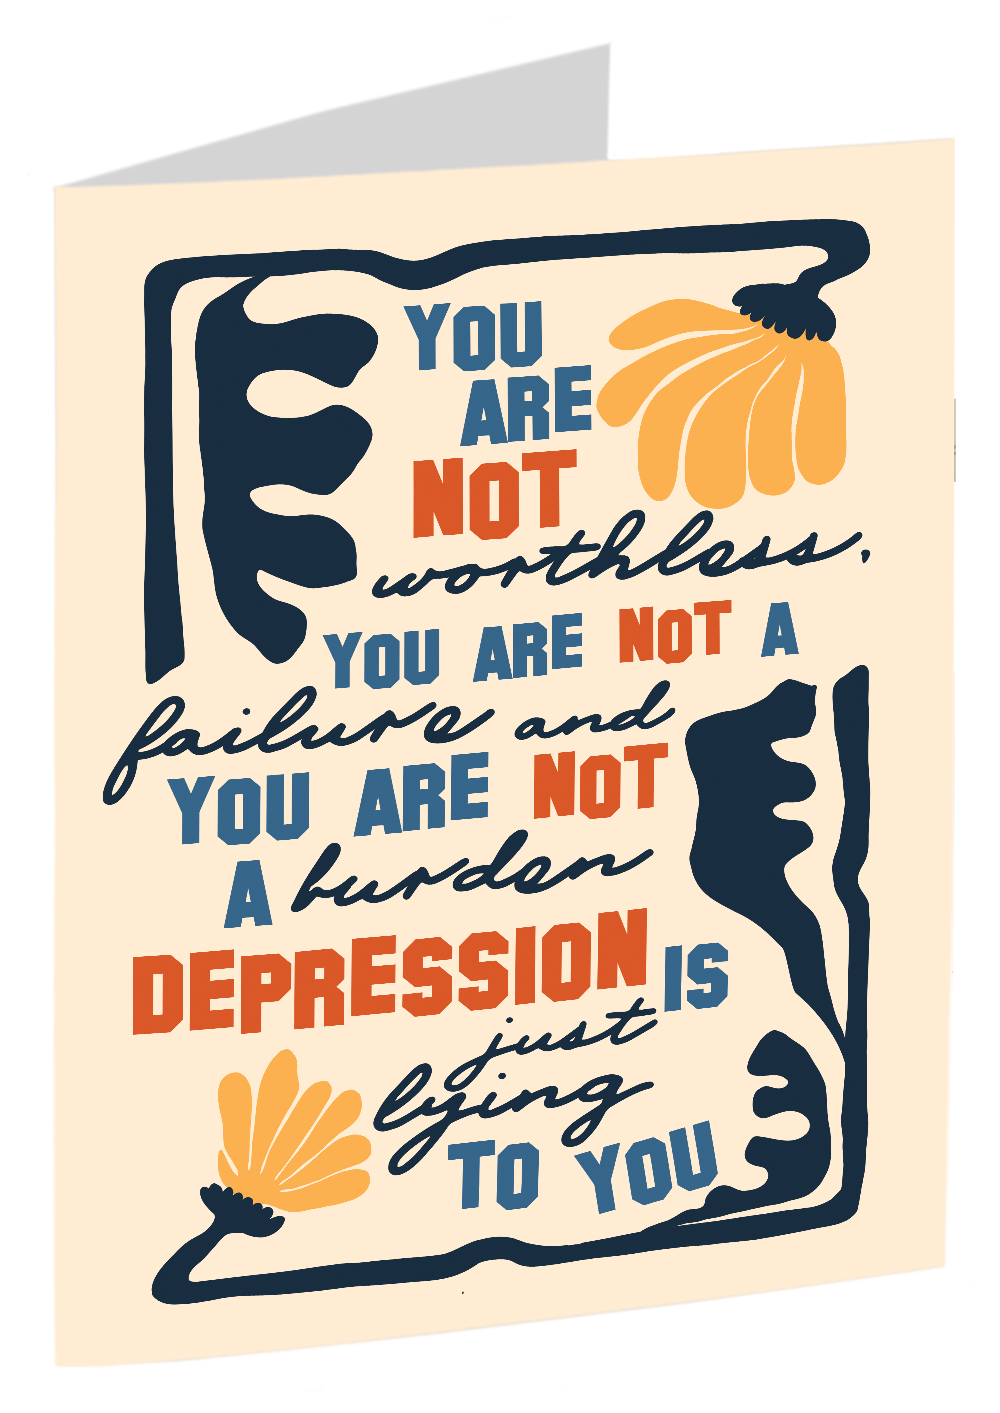 "You Are Not Worthless, You Are Not A Failure, And You Are Not A Burden ... Depression Is Just Lying To You" - A Card To Help People With Depression Combat The Negative Things They Tell Themselves